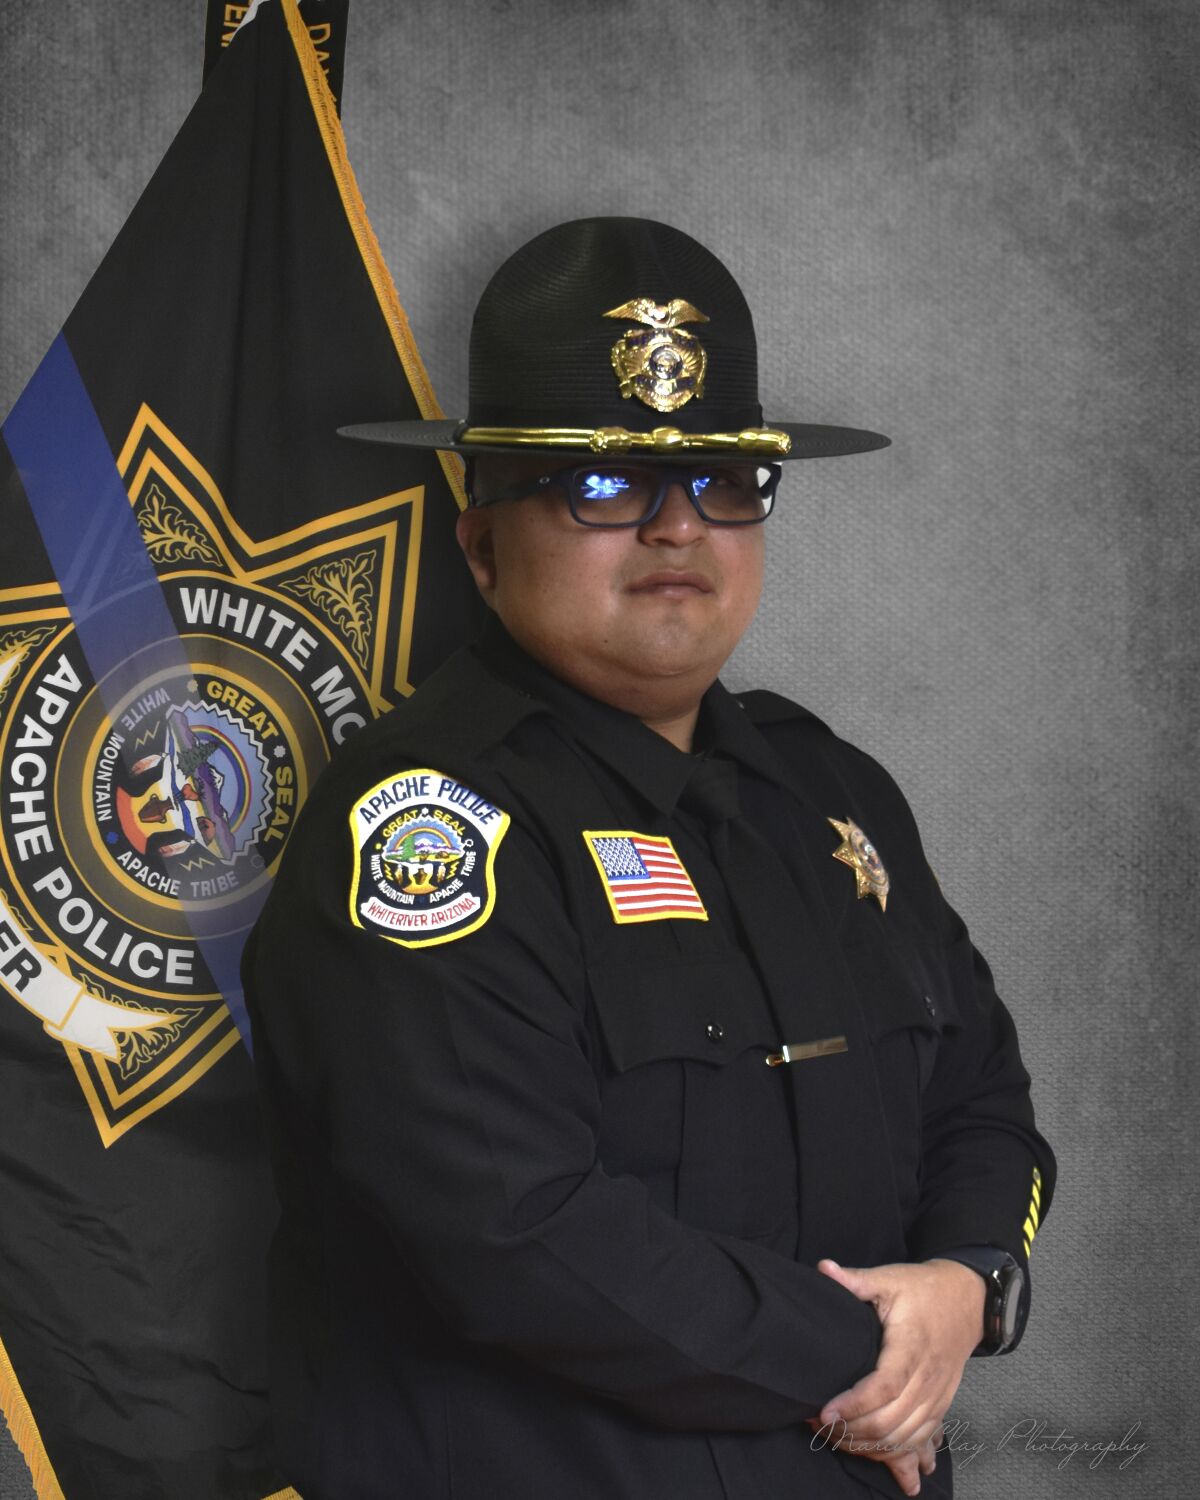 This undated photo provided by the Navajo County Sheriff's Office shows Officer Adrian Lopez. Adrian Lopez Sr., 35, was identified Friday, June 3, 2022, as the White Mountain Apache Police officer shot and killed during a traffic stop Thursday night in the town of Whiteriver on the Fort Apache Indian Reservation. The suspect was killed and another officer wounded in a subsequent shootout. (Navajo County Sheriff's Office via The AP)